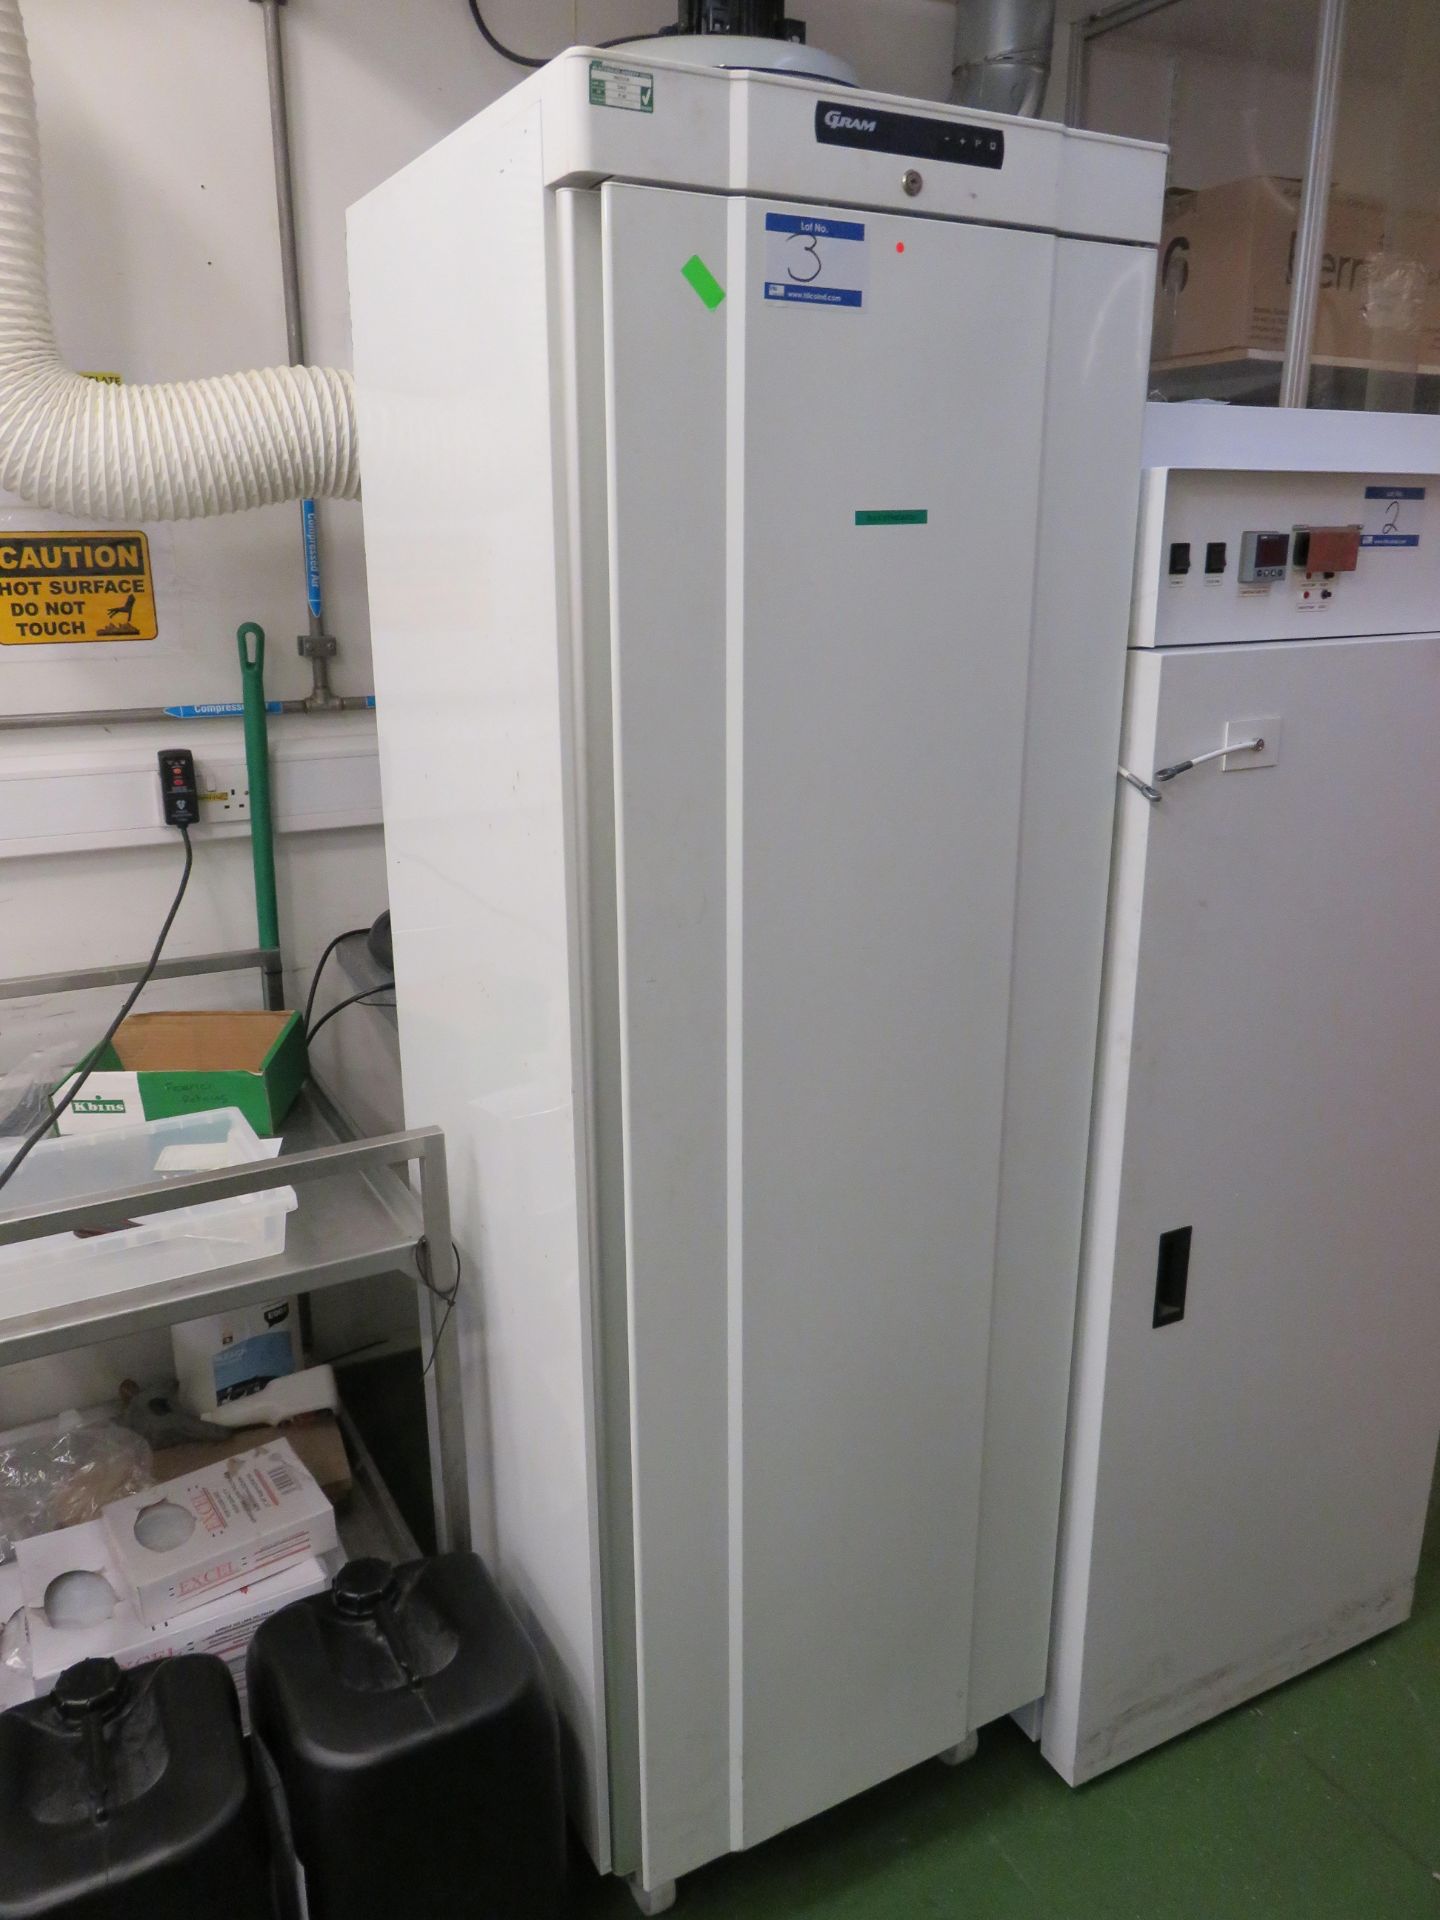 Gram K410 LG C6W Painted Single Door Cooled Incubator with Extraction to Atmosphere Serial No. 10132